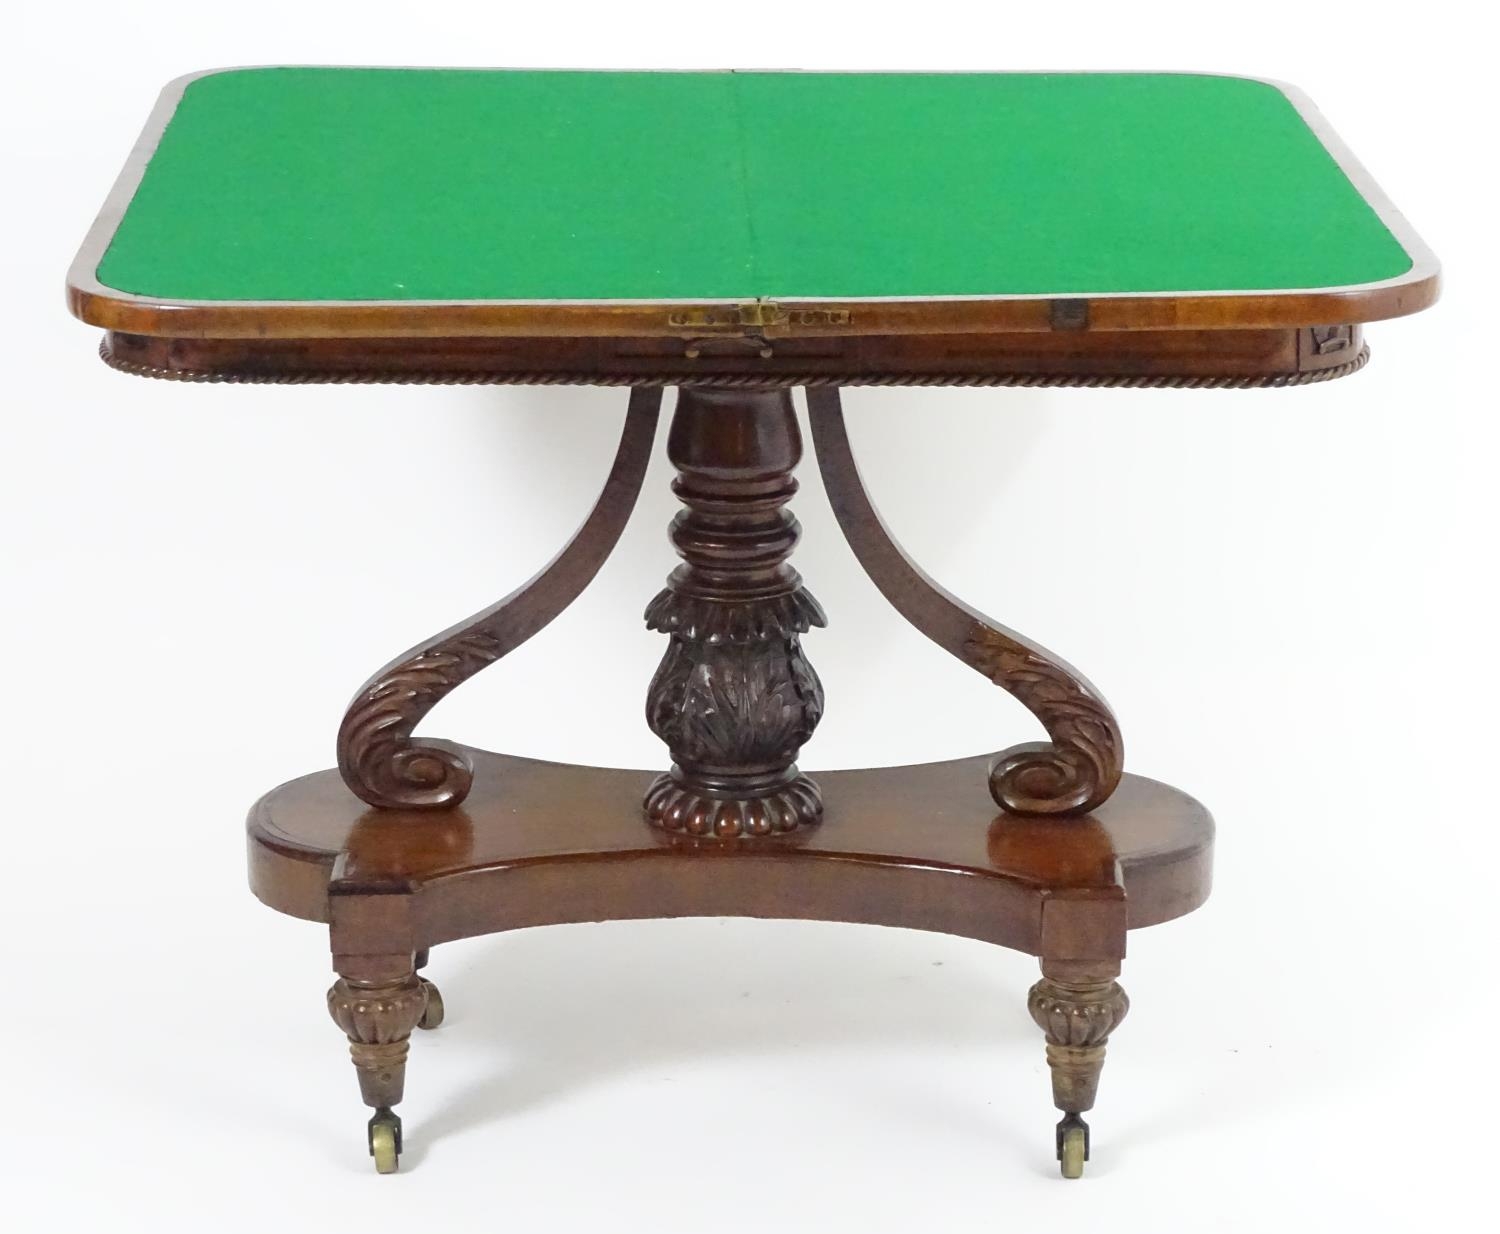 An early / mid 19thc Scottish platform card table with a mahogany and rosewood crossbanded top, - Image 9 of 10